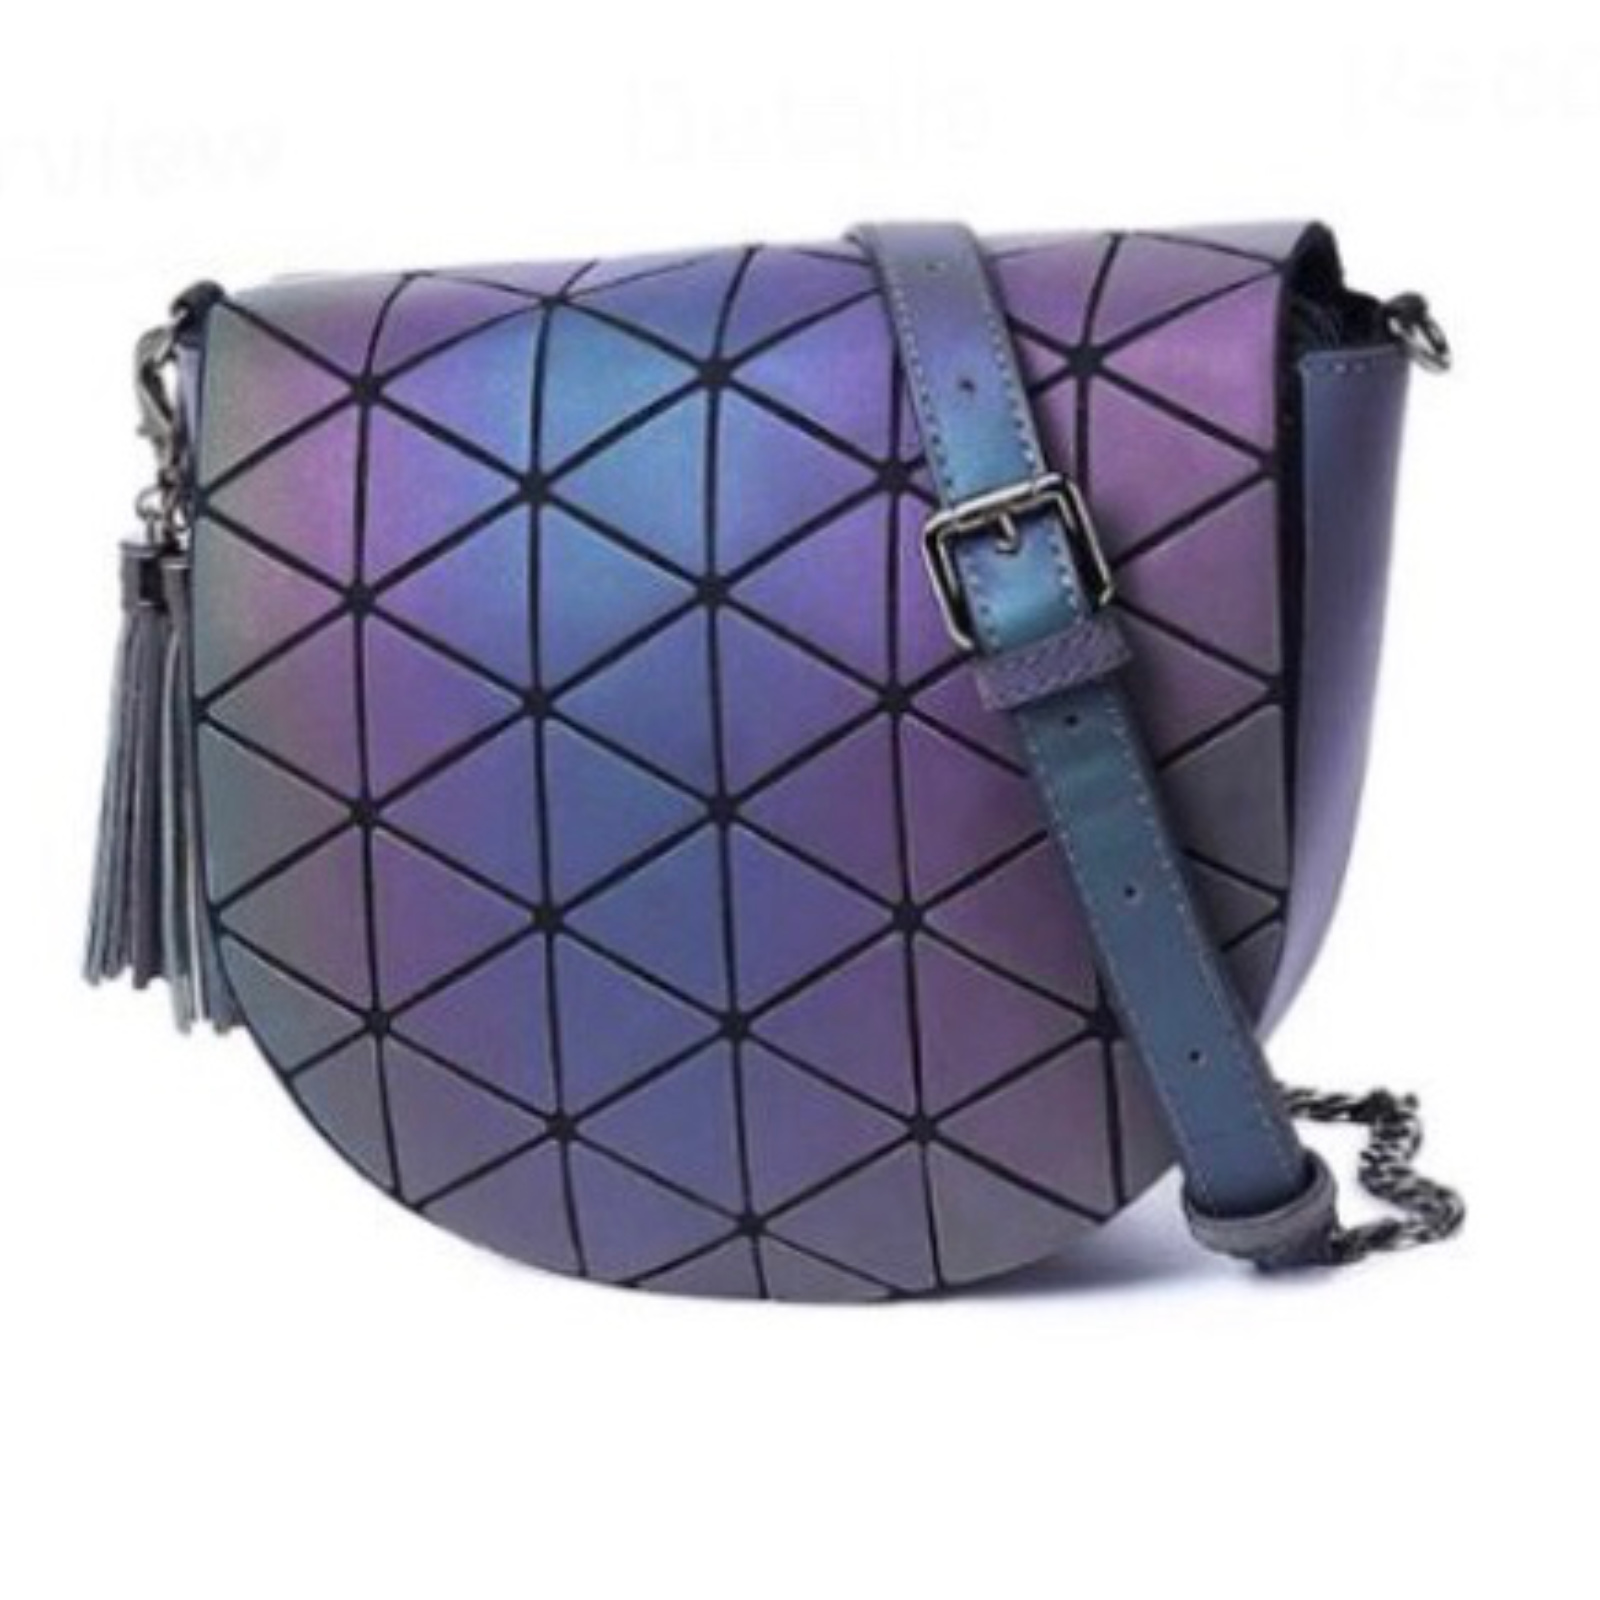 Reflective Colour Changing Crossover Bag With Tassel – The Tangerine Tree